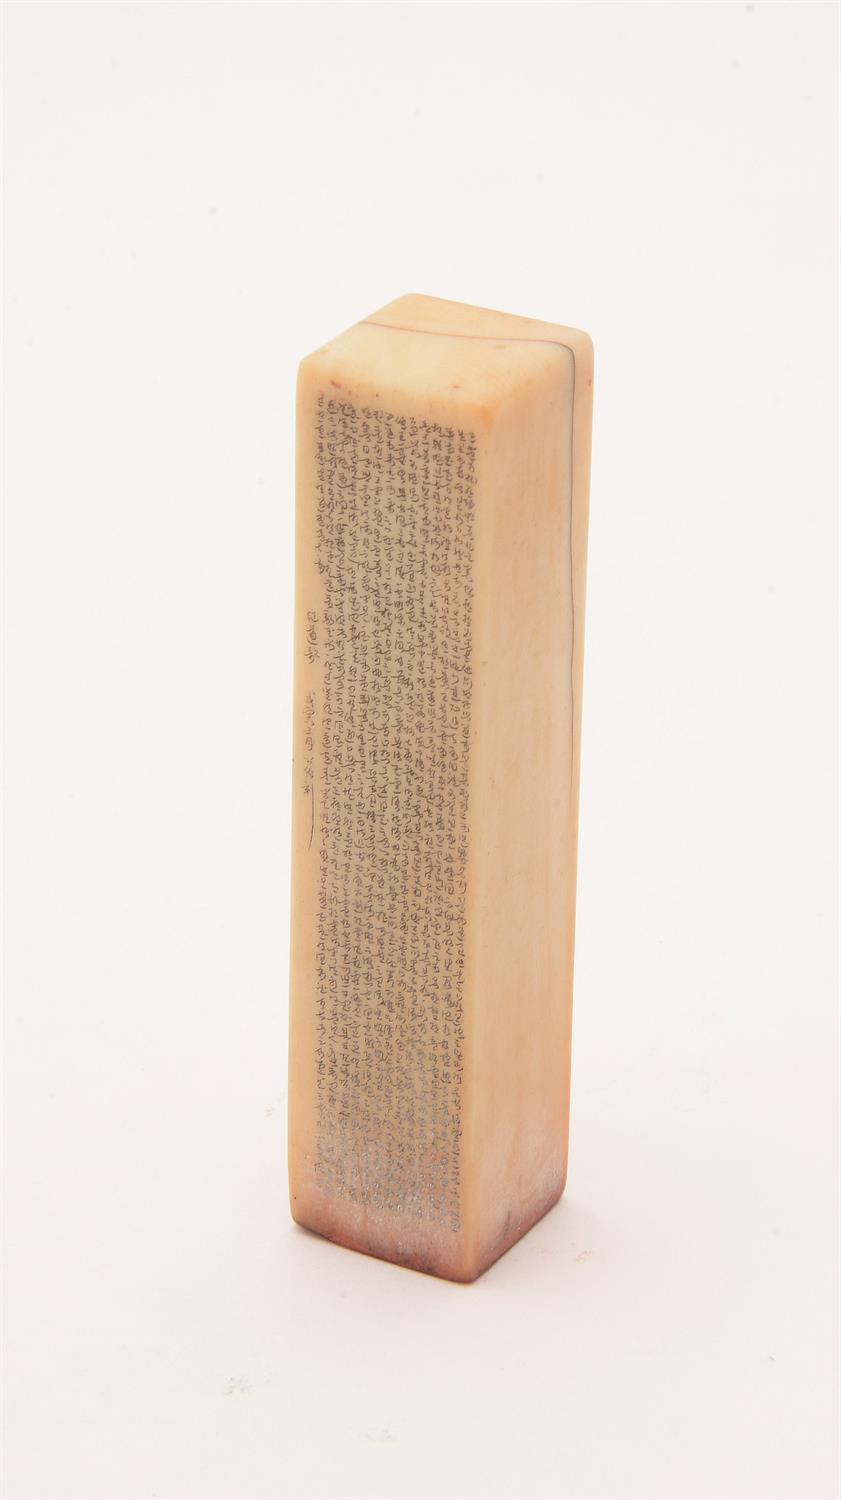 Y An ivory seal by Liu Gongbo (1910-1967) - Image 3 of 7